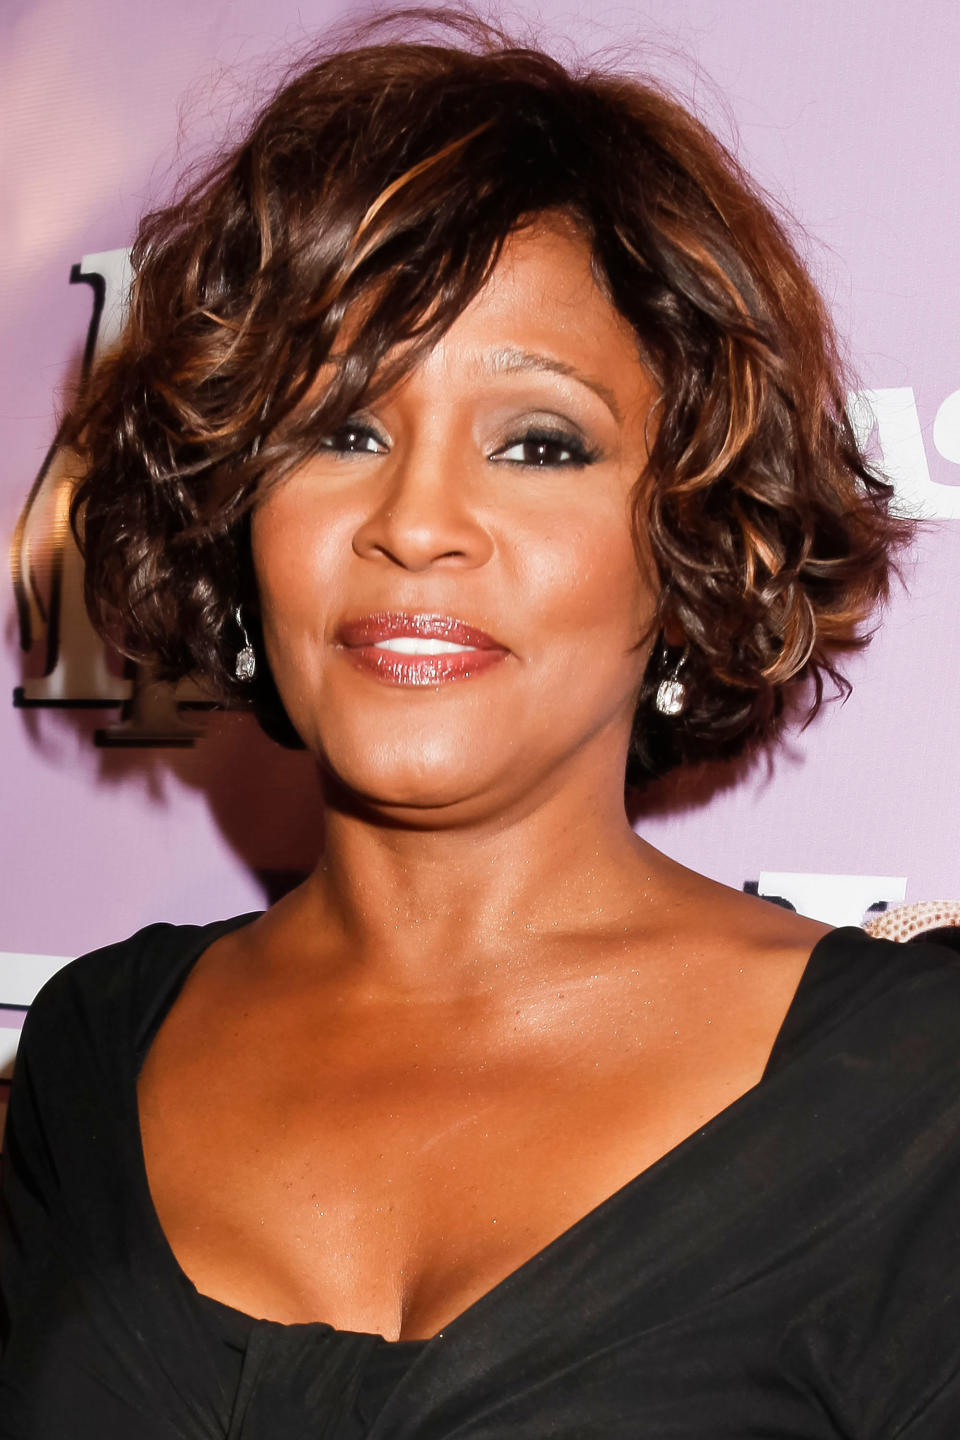 Whitney Houston suffered multiple miscarriages in her life. During a 1993 interview with Barbara Walters, she said she had a miscarriage while filming "The Bodyguard."<br /><br />"It was very painful, emotionally and physically," <a href="http://abcnews.go.com/Entertainment/dramatic-moments-whitney-lifetime-biopic-whitney-houston/story?id=28278521" target="_blank">Houston said</a>. "I was back on the set the next day. And it's over. But I had Bobbi Kristina one year later, and I am blessed."